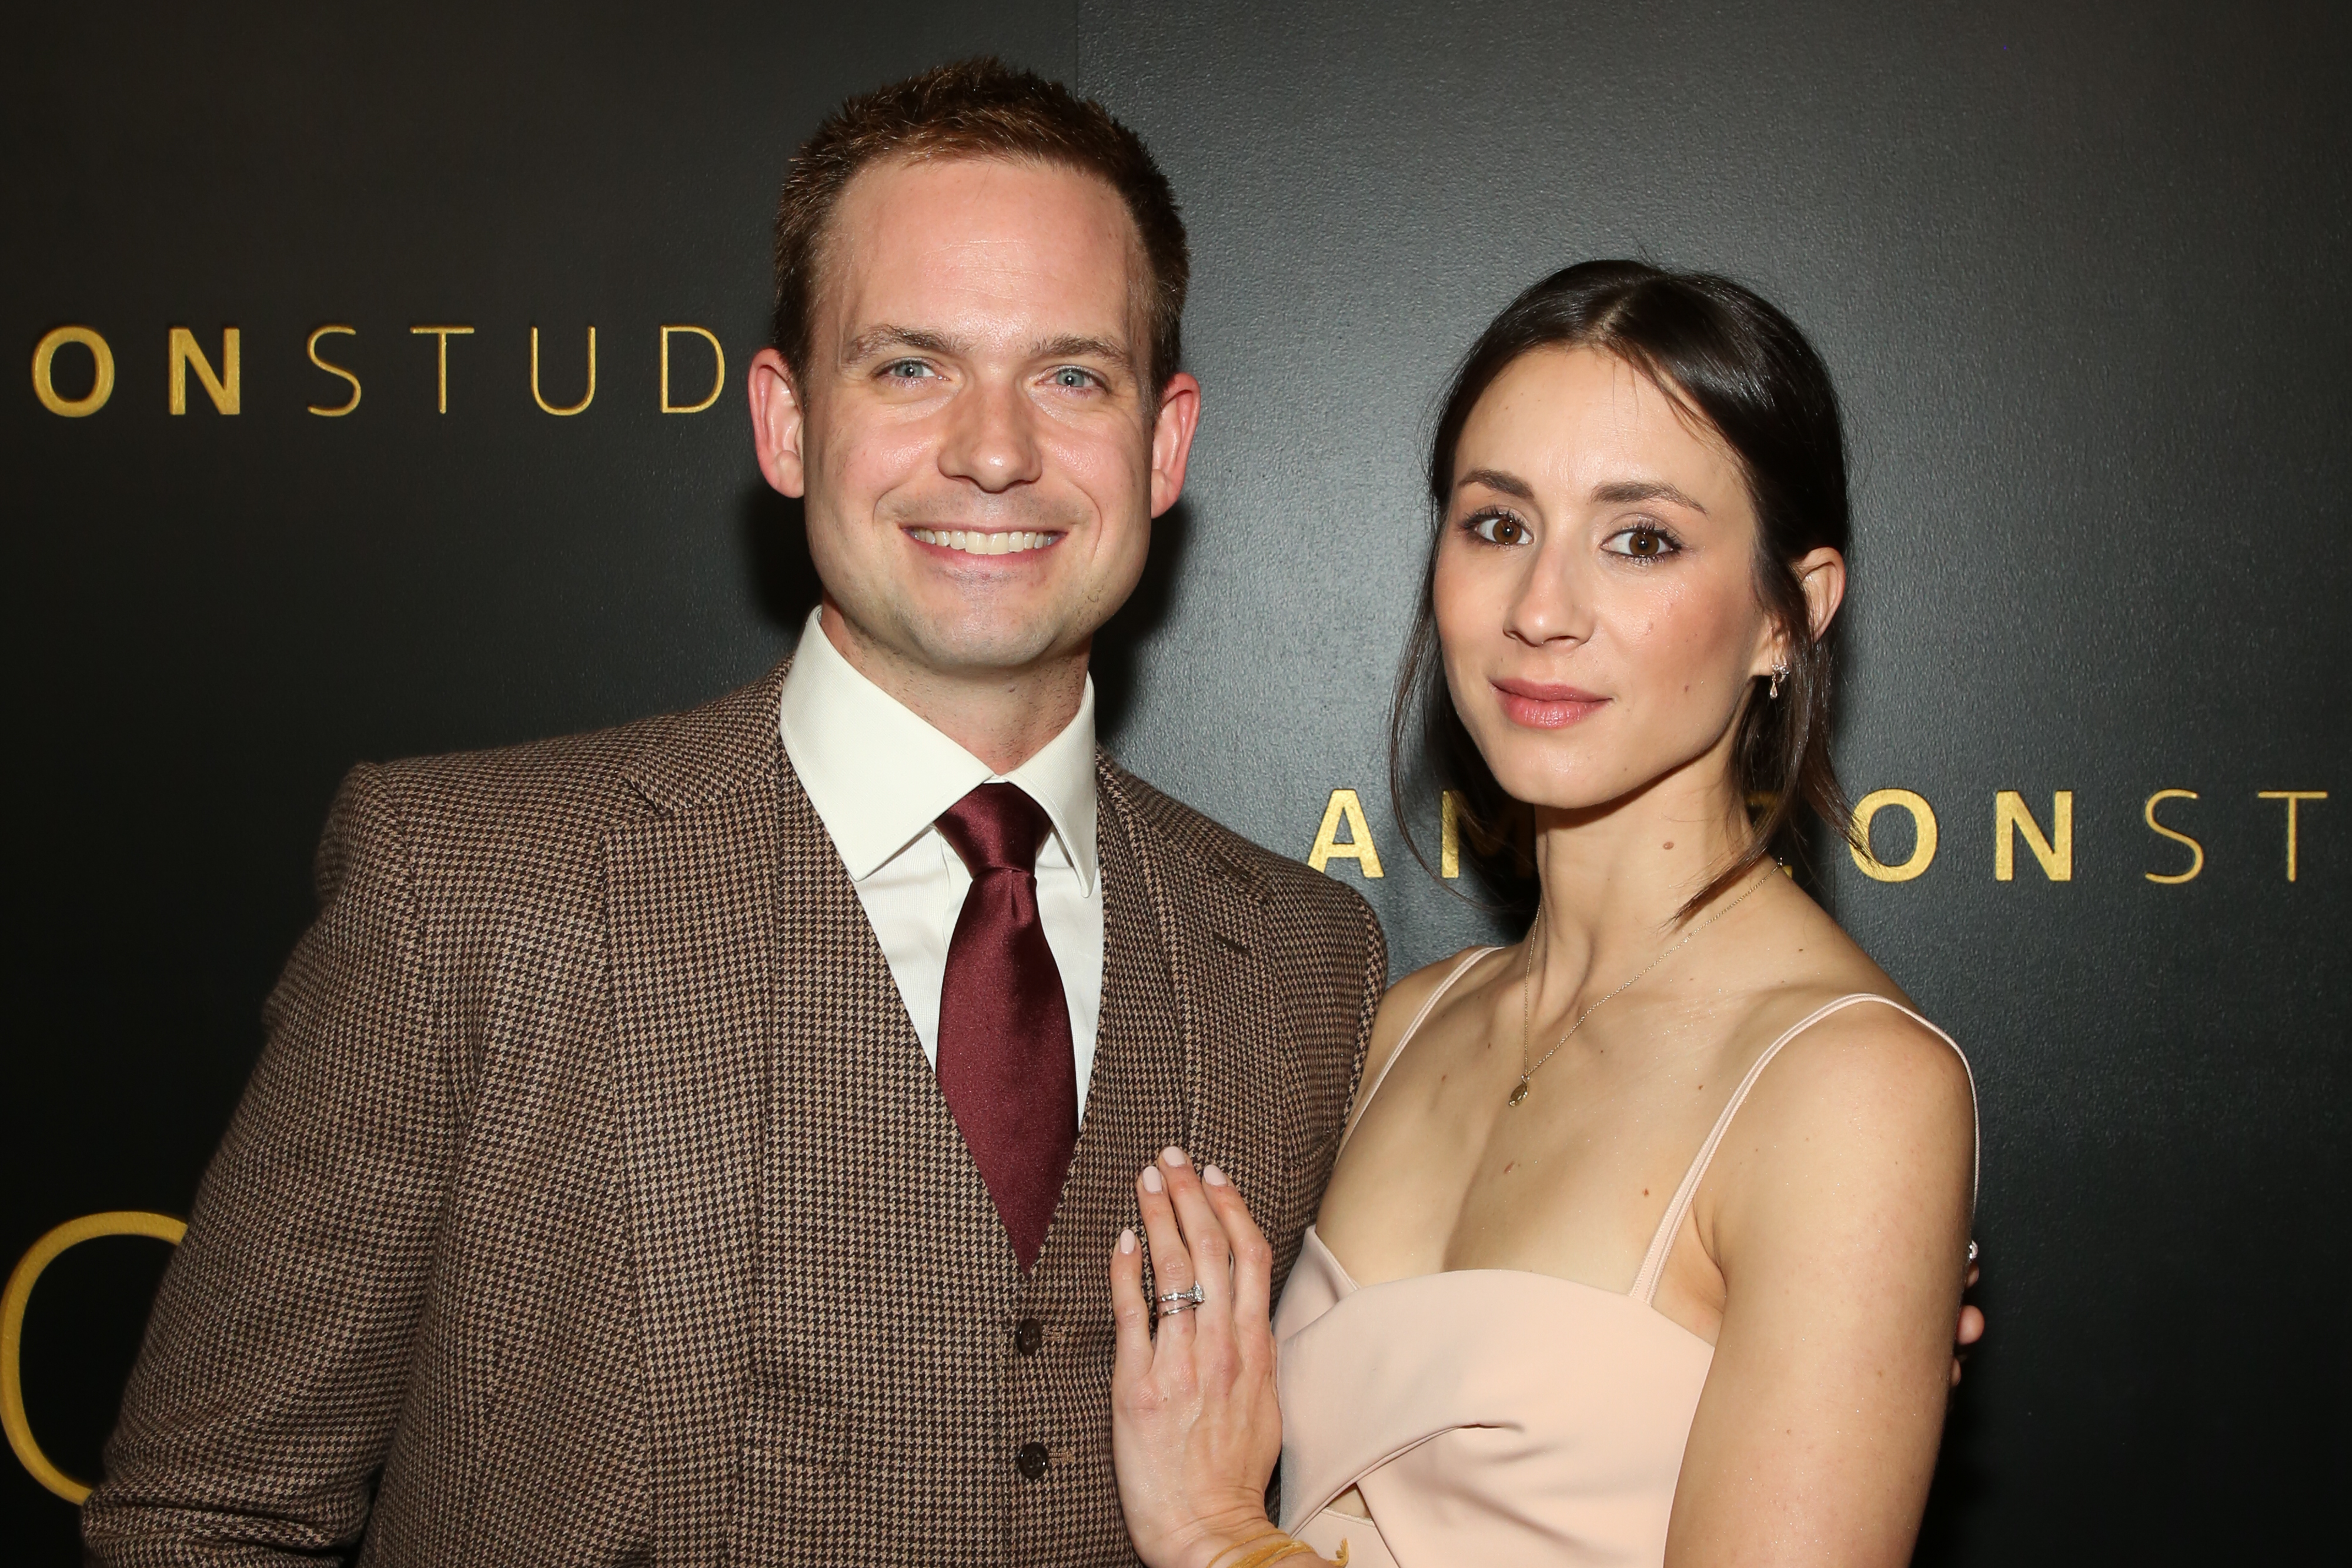 Actors Patrick J. Adams (L) and Troian Bellisario (R) attend Amazon Studios Golden Globes after party at The Beverly Hilton Hotel, on January 5, 2020 in, Beverly Hills, California. | Source: Getty Images